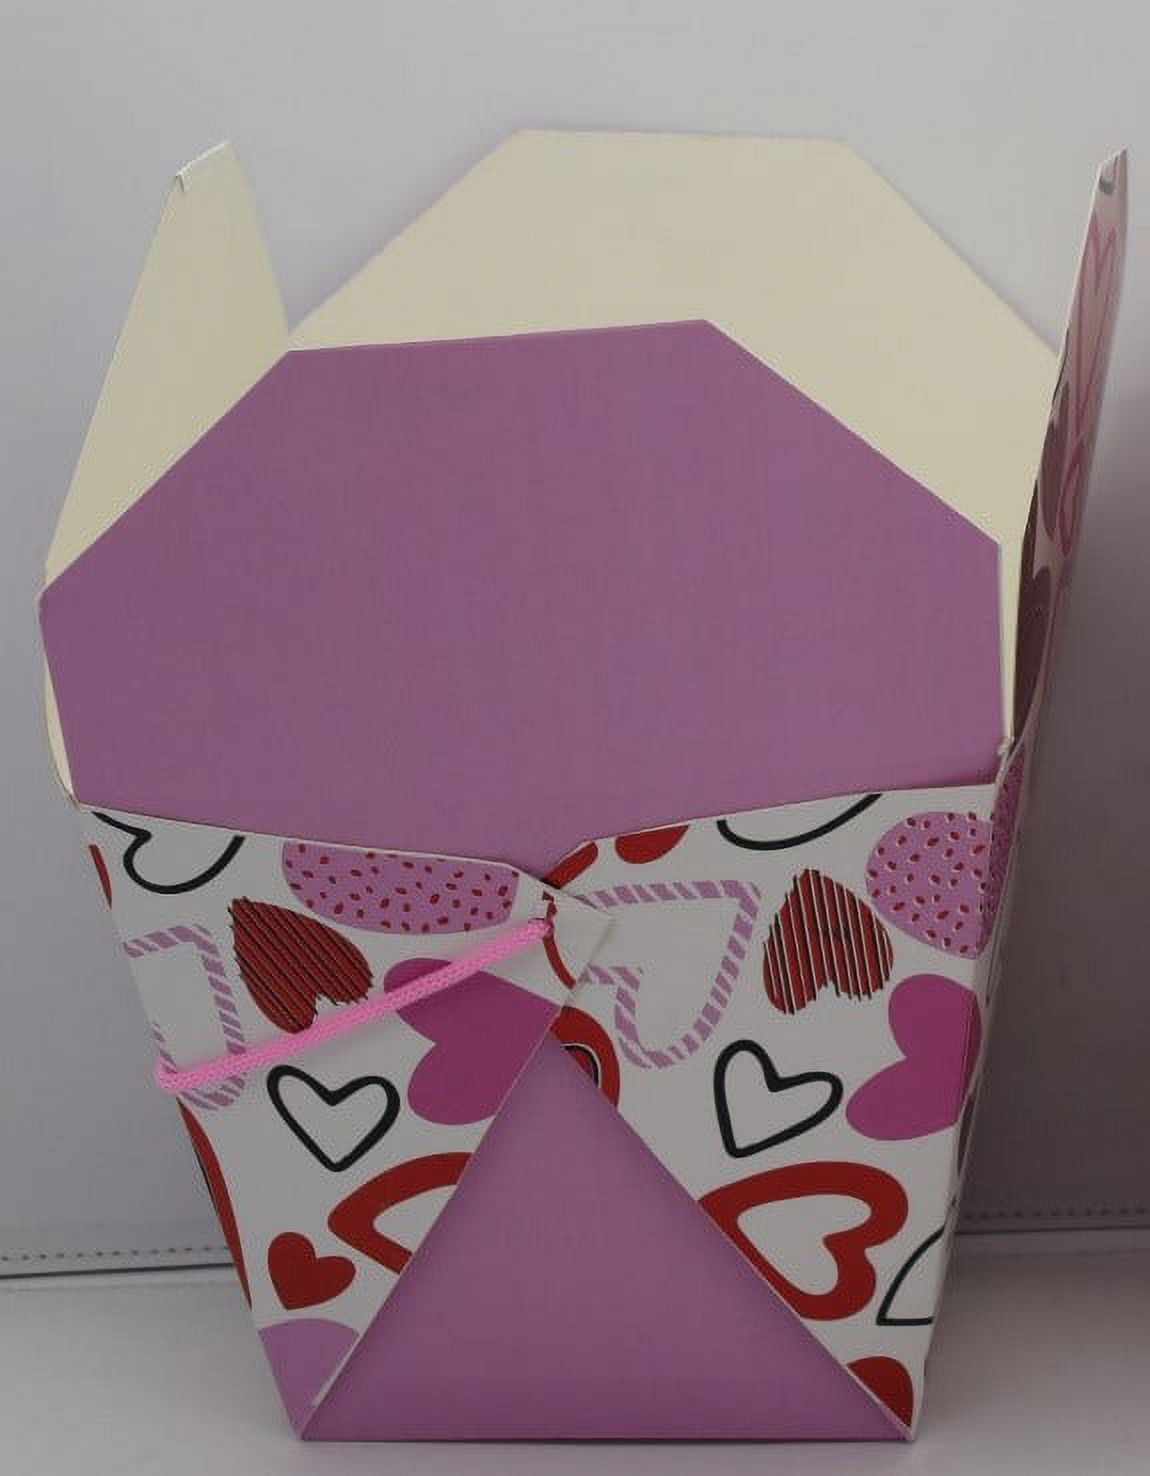 Chinese Takeout Boxes - Bubblegum Pink